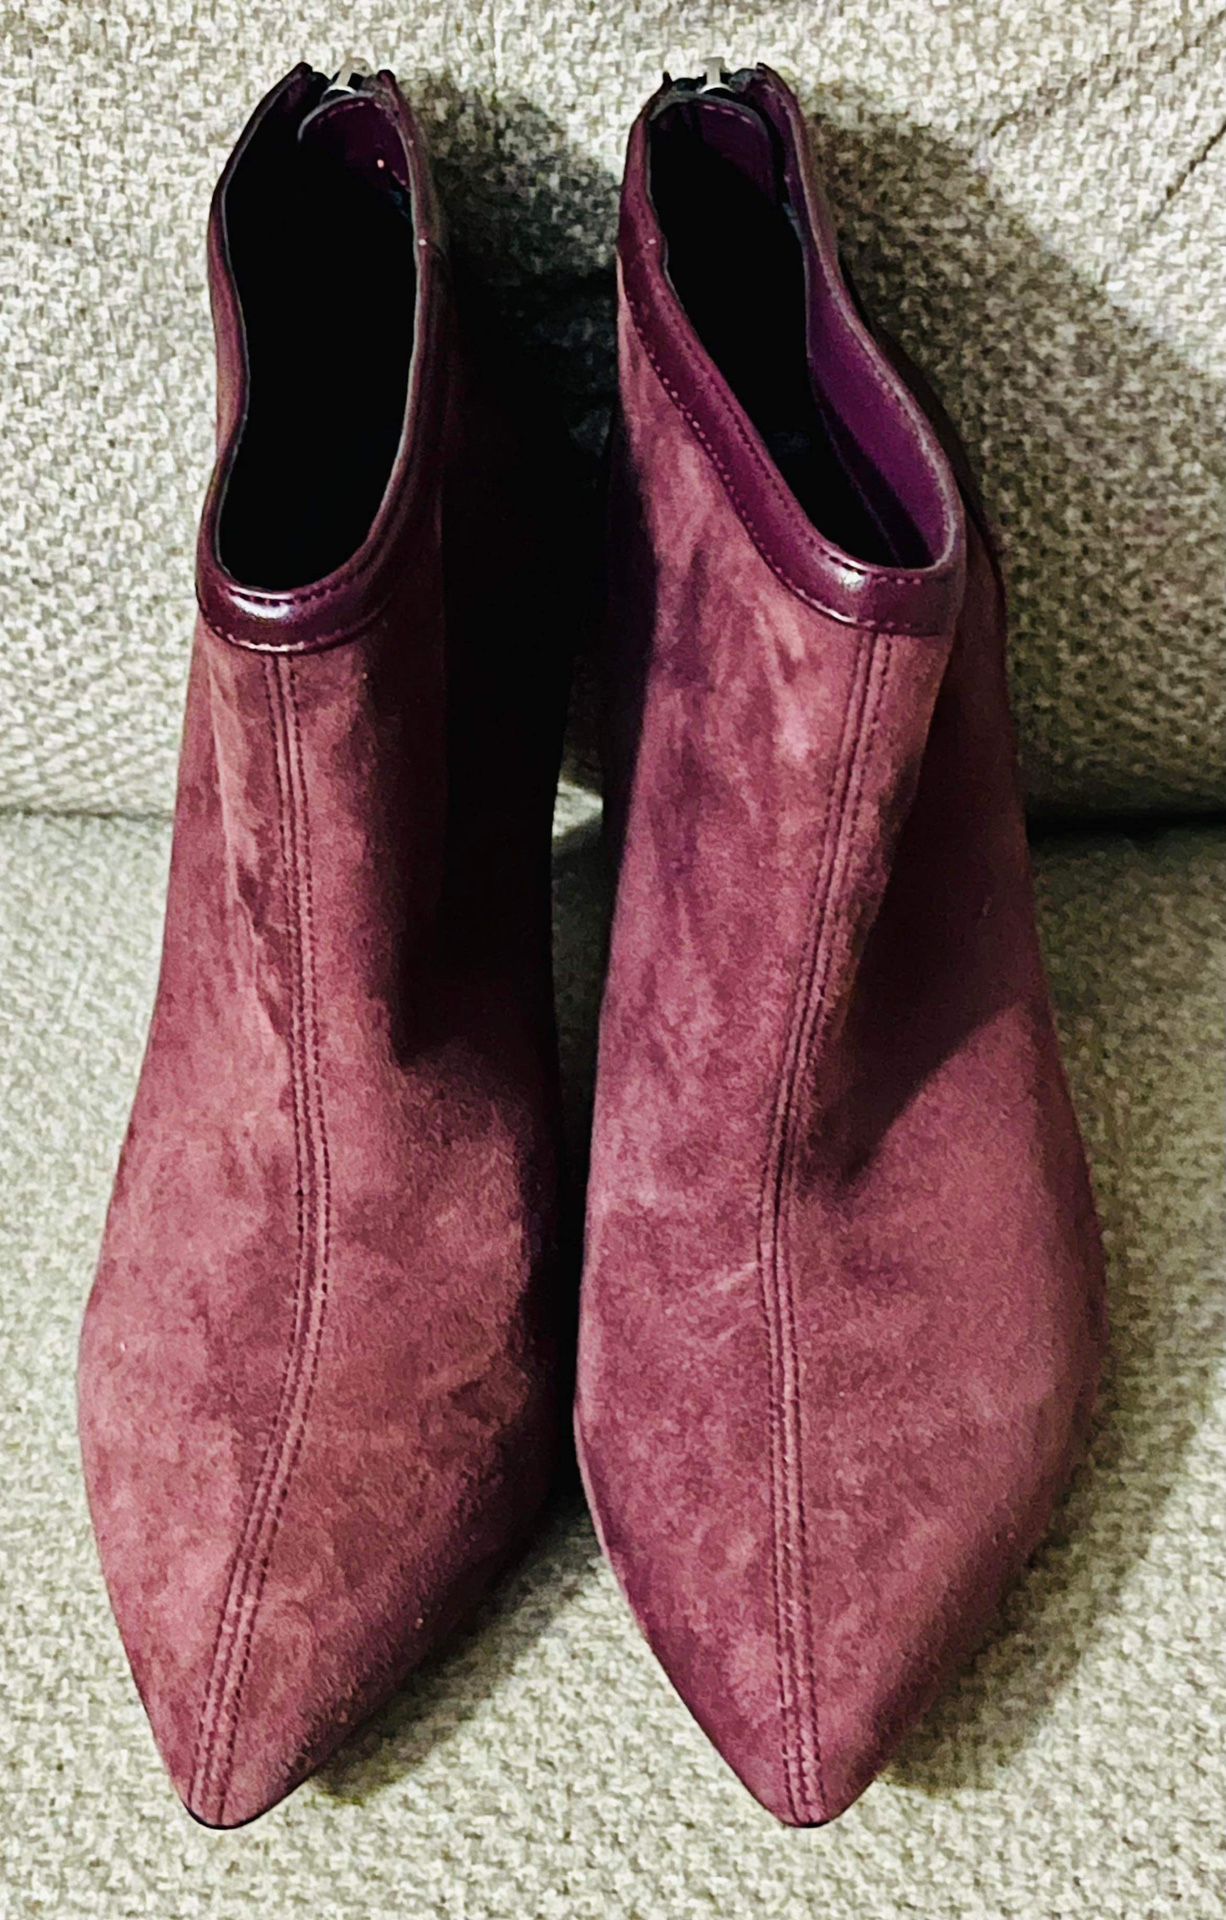 Adrienne Vittadini Leather Booties - Burgundy Leather & Suede - Women’s Size 8M